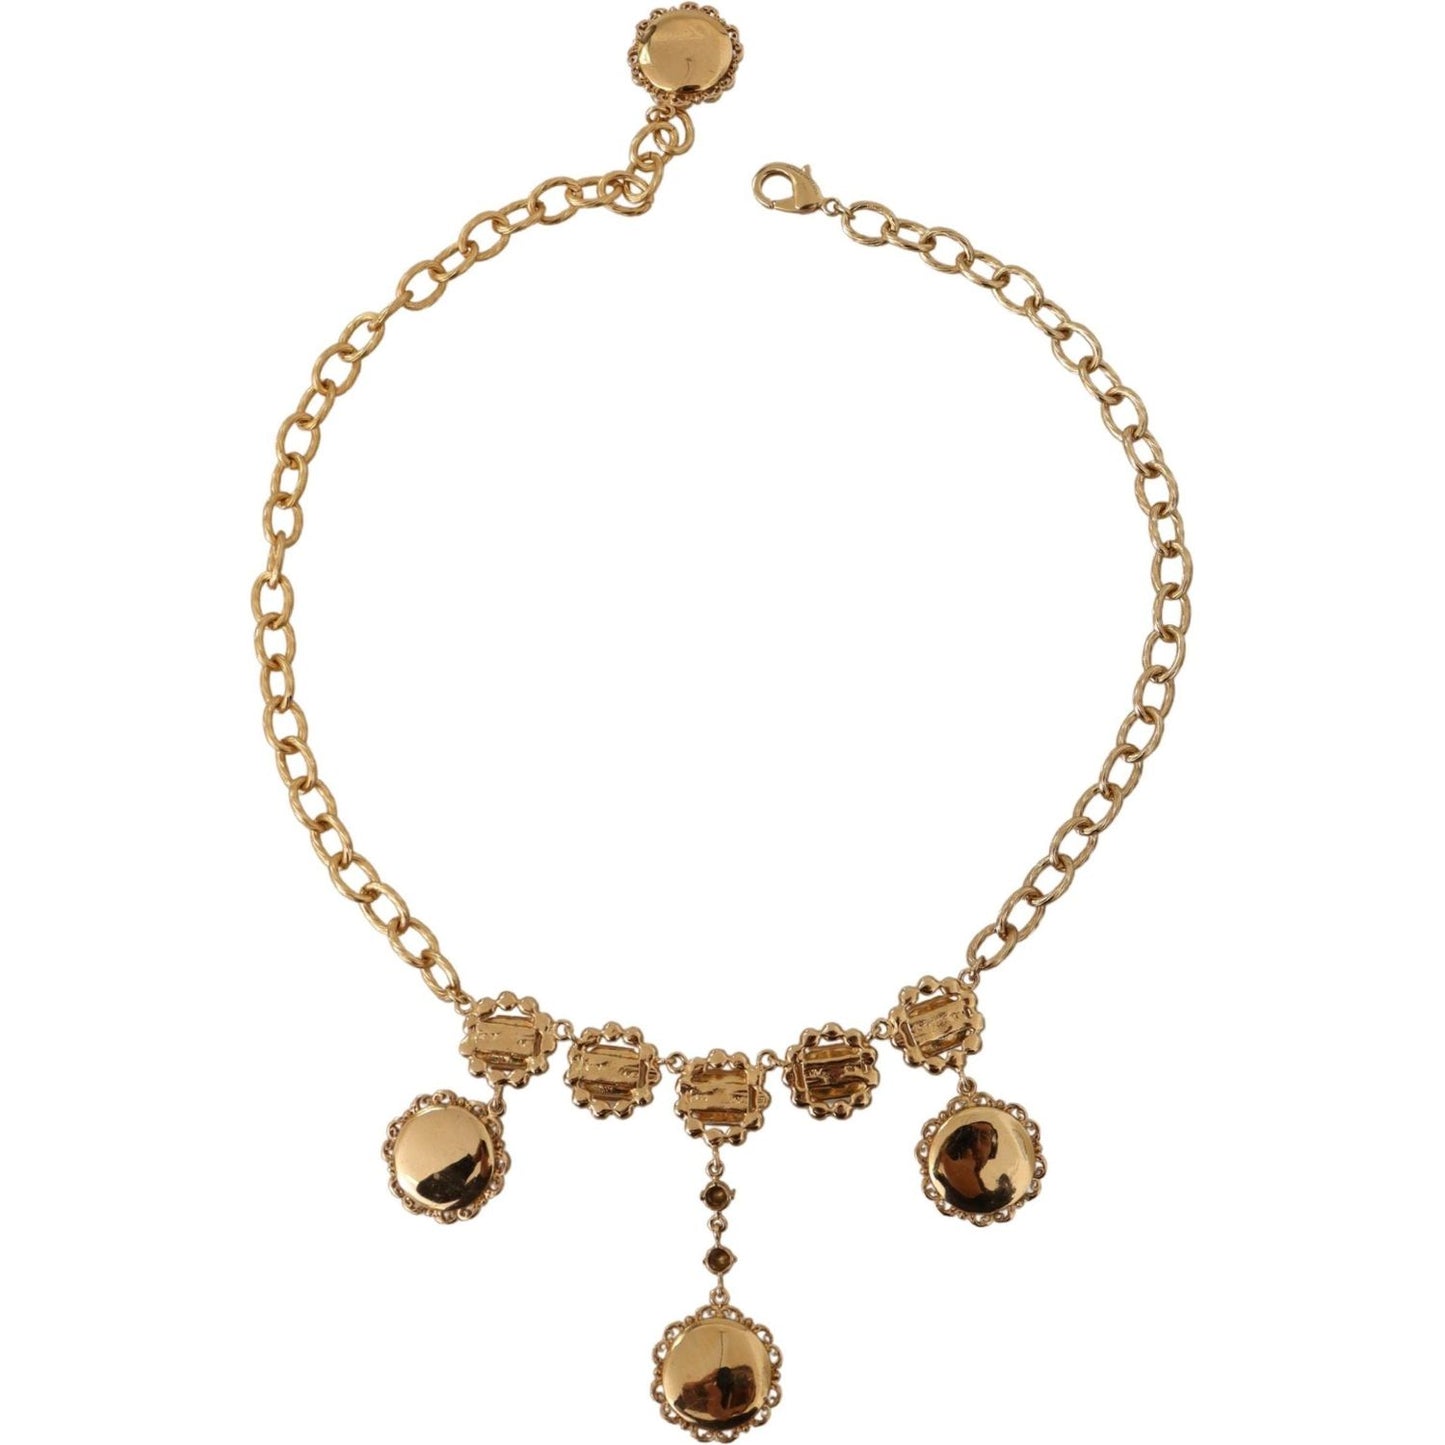 Dolce & Gabbana Elegant Timeless Statement Necklace WOMAN NECKLACE gold-clock-statement-crystal-chain-necklace